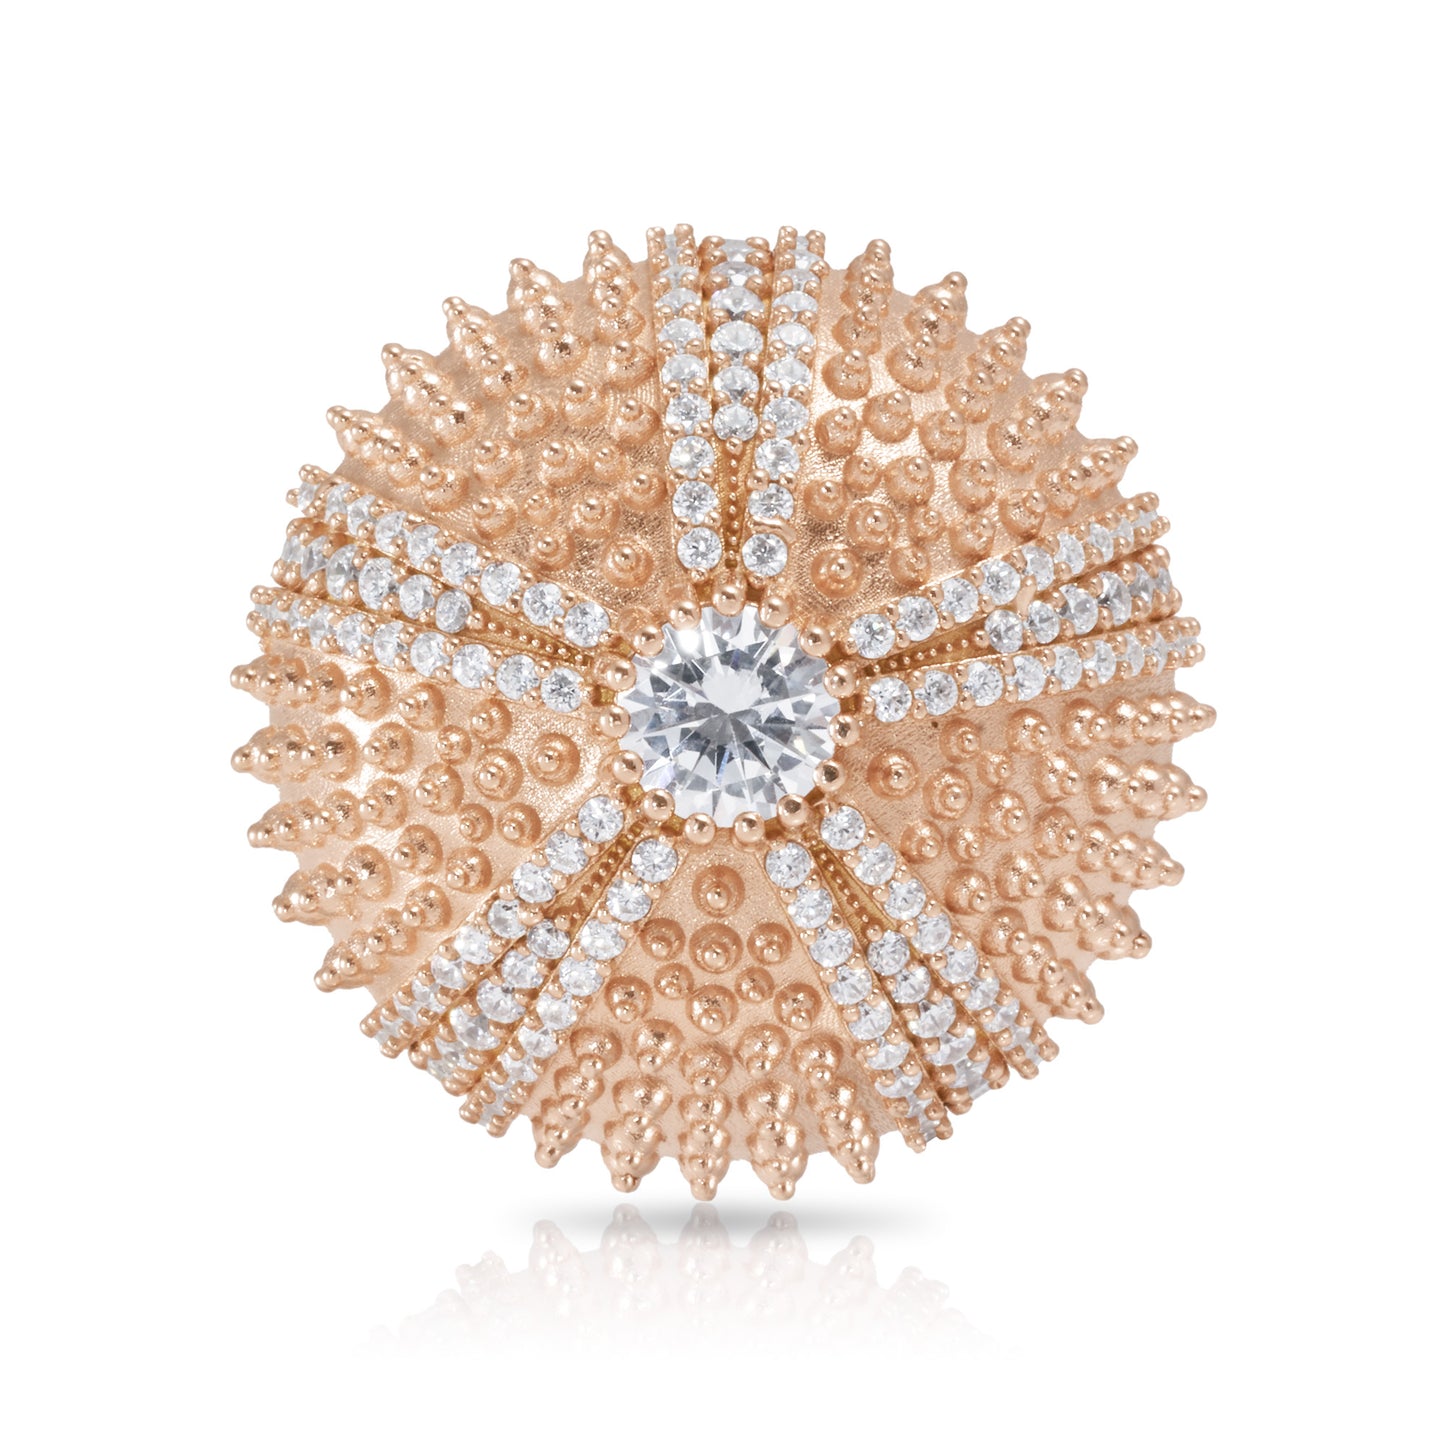 Pink Sea Urchin Cocktail Ring